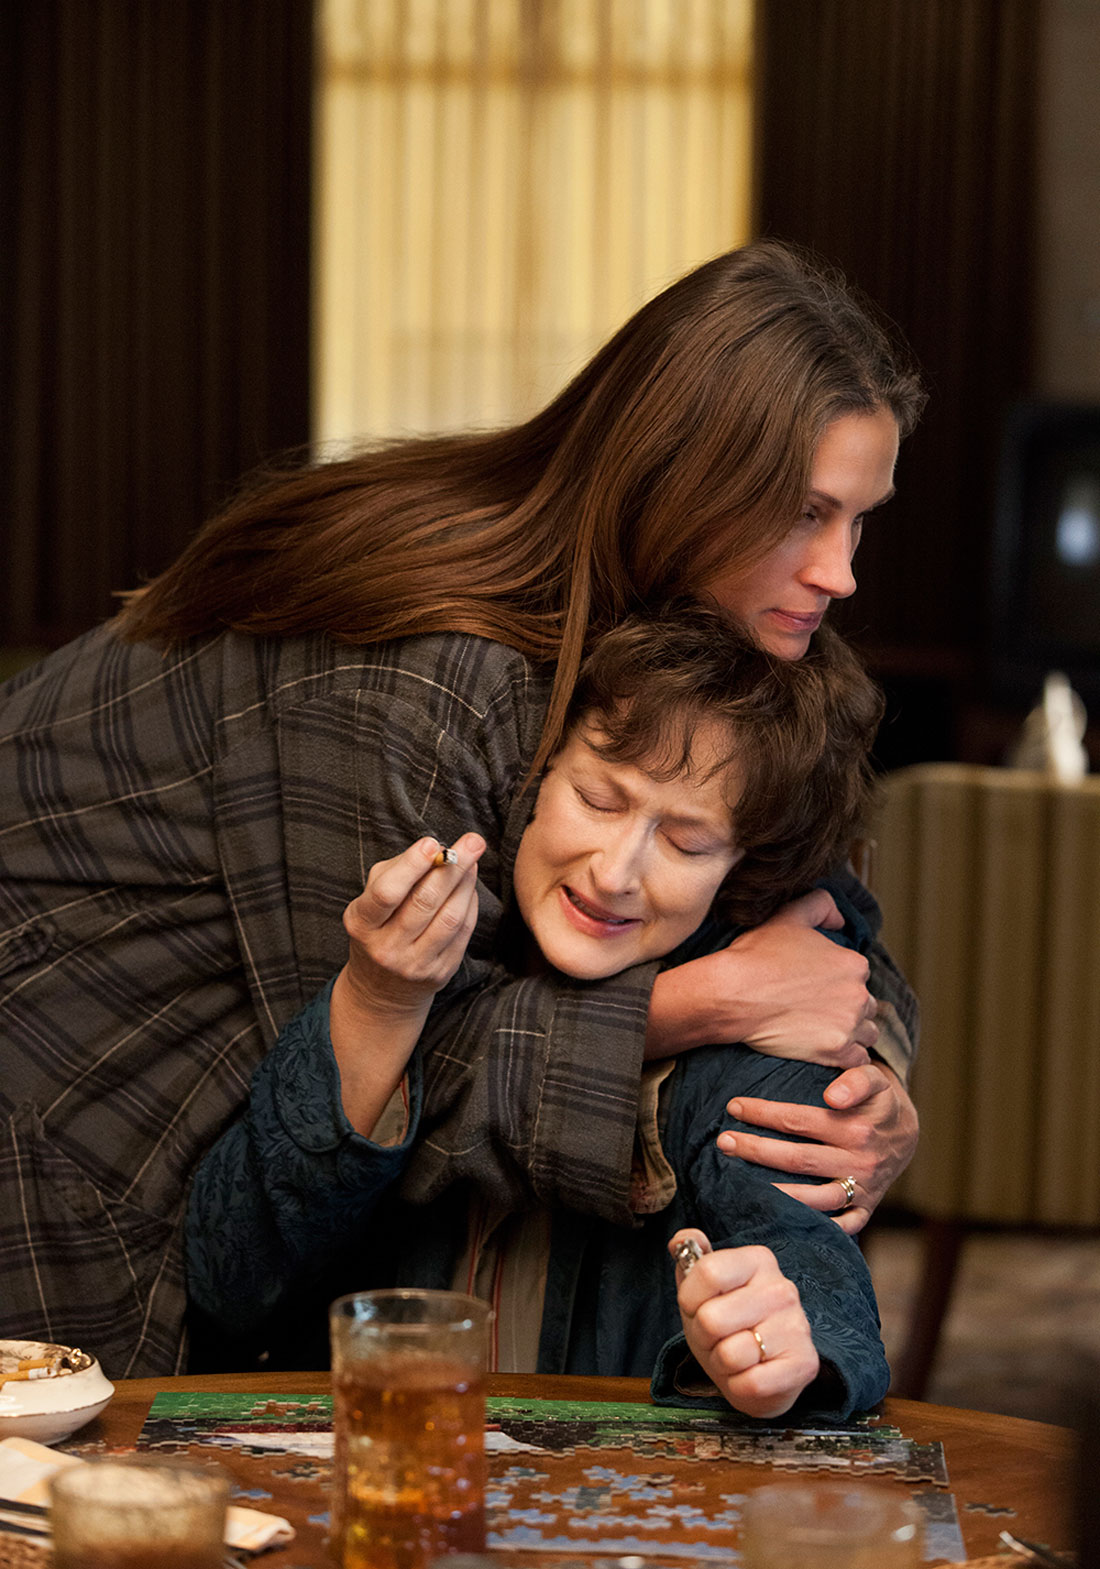 Julia Roberts and Meryl Streep in August: Osage County at LSFF.